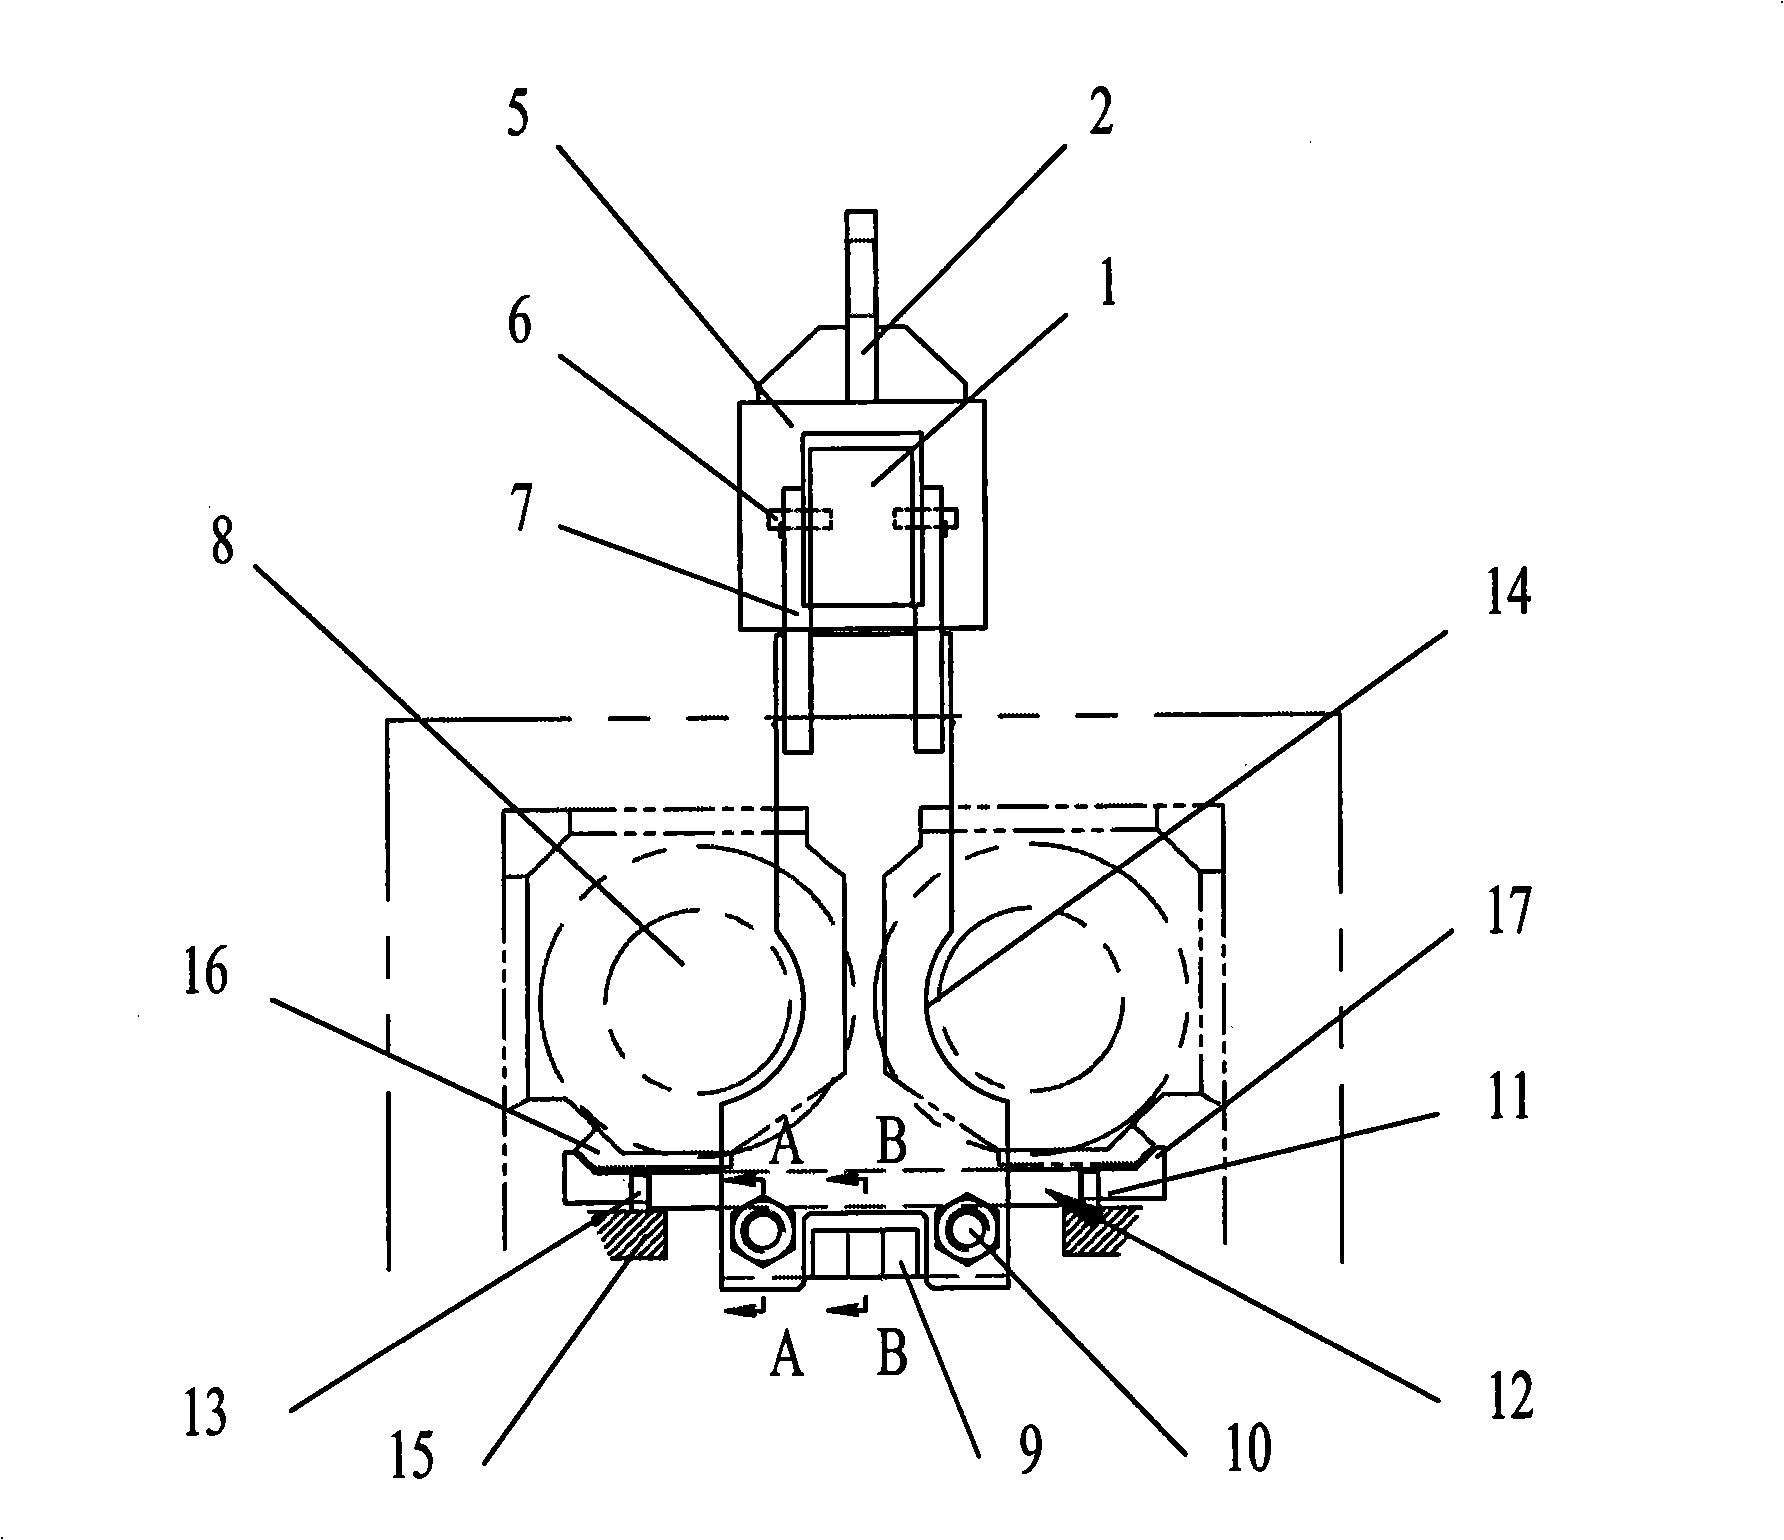 Upper back-up roll extractor of cluster roll